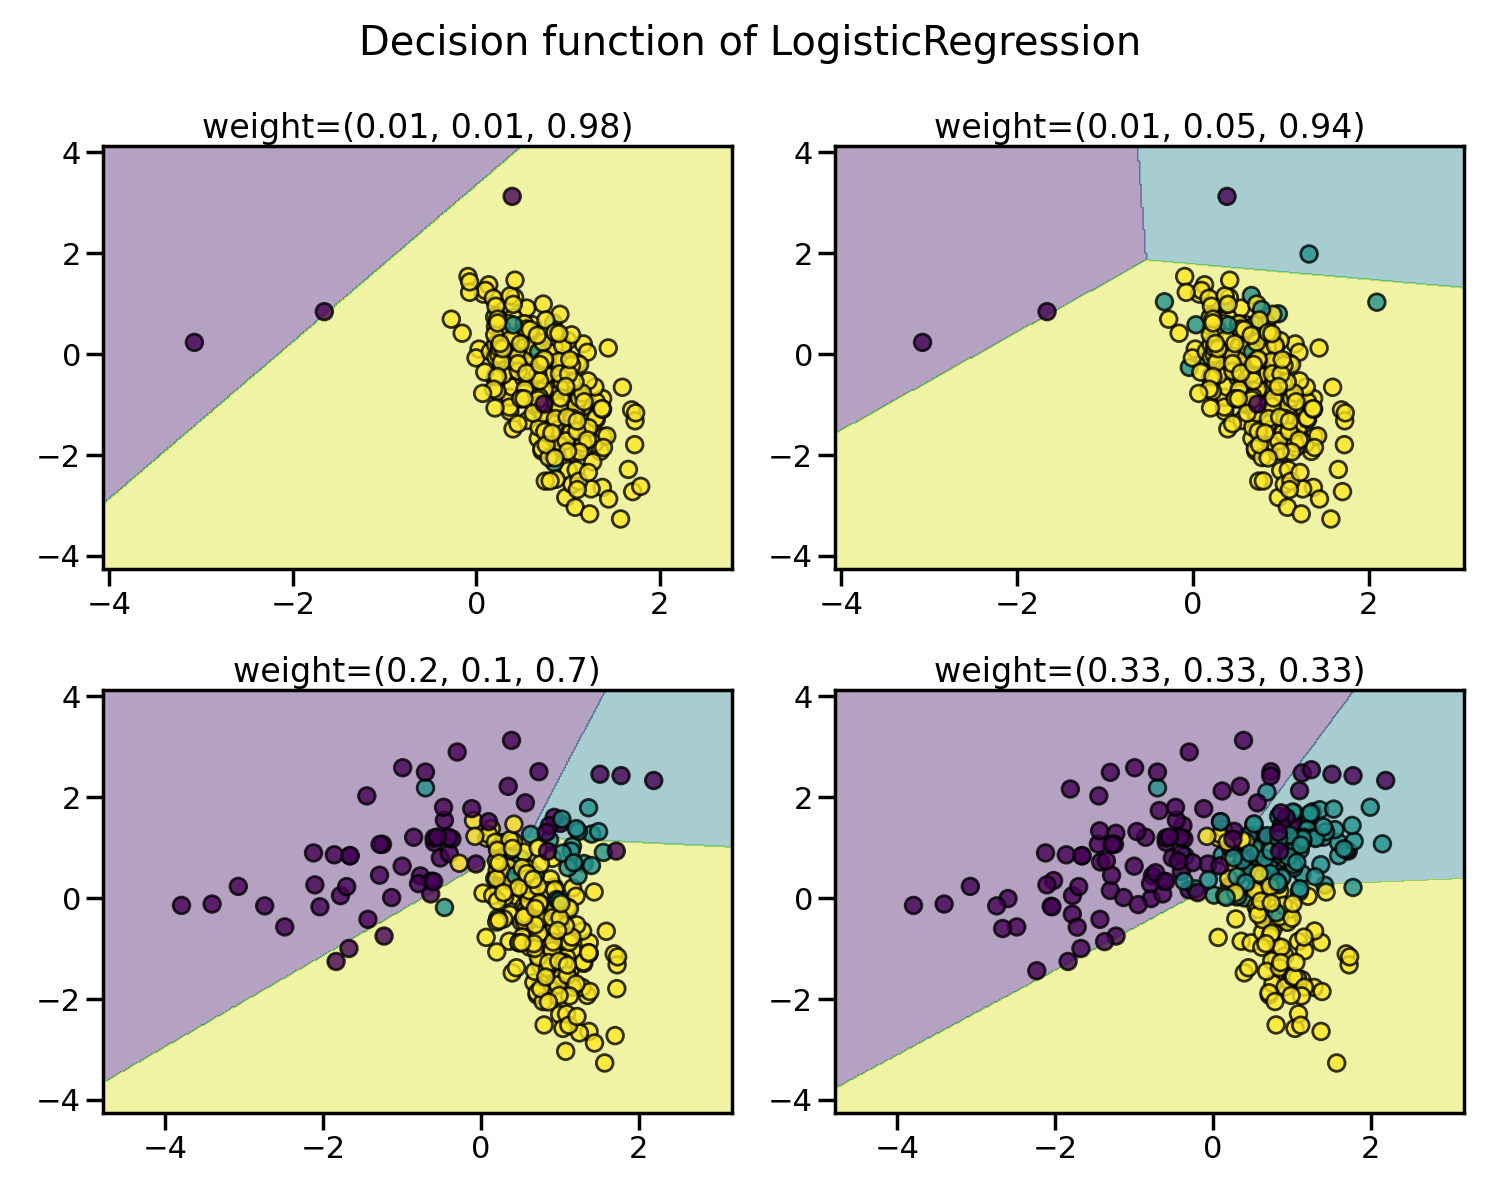 Decision function of LogisticRegression, weight=(0.01, 0.01, 0.98), weight=(0.01, 0.05, 0.94), weight=(0.2, 0.1, 0.7), weight=(0.33, 0.33, 0.33)